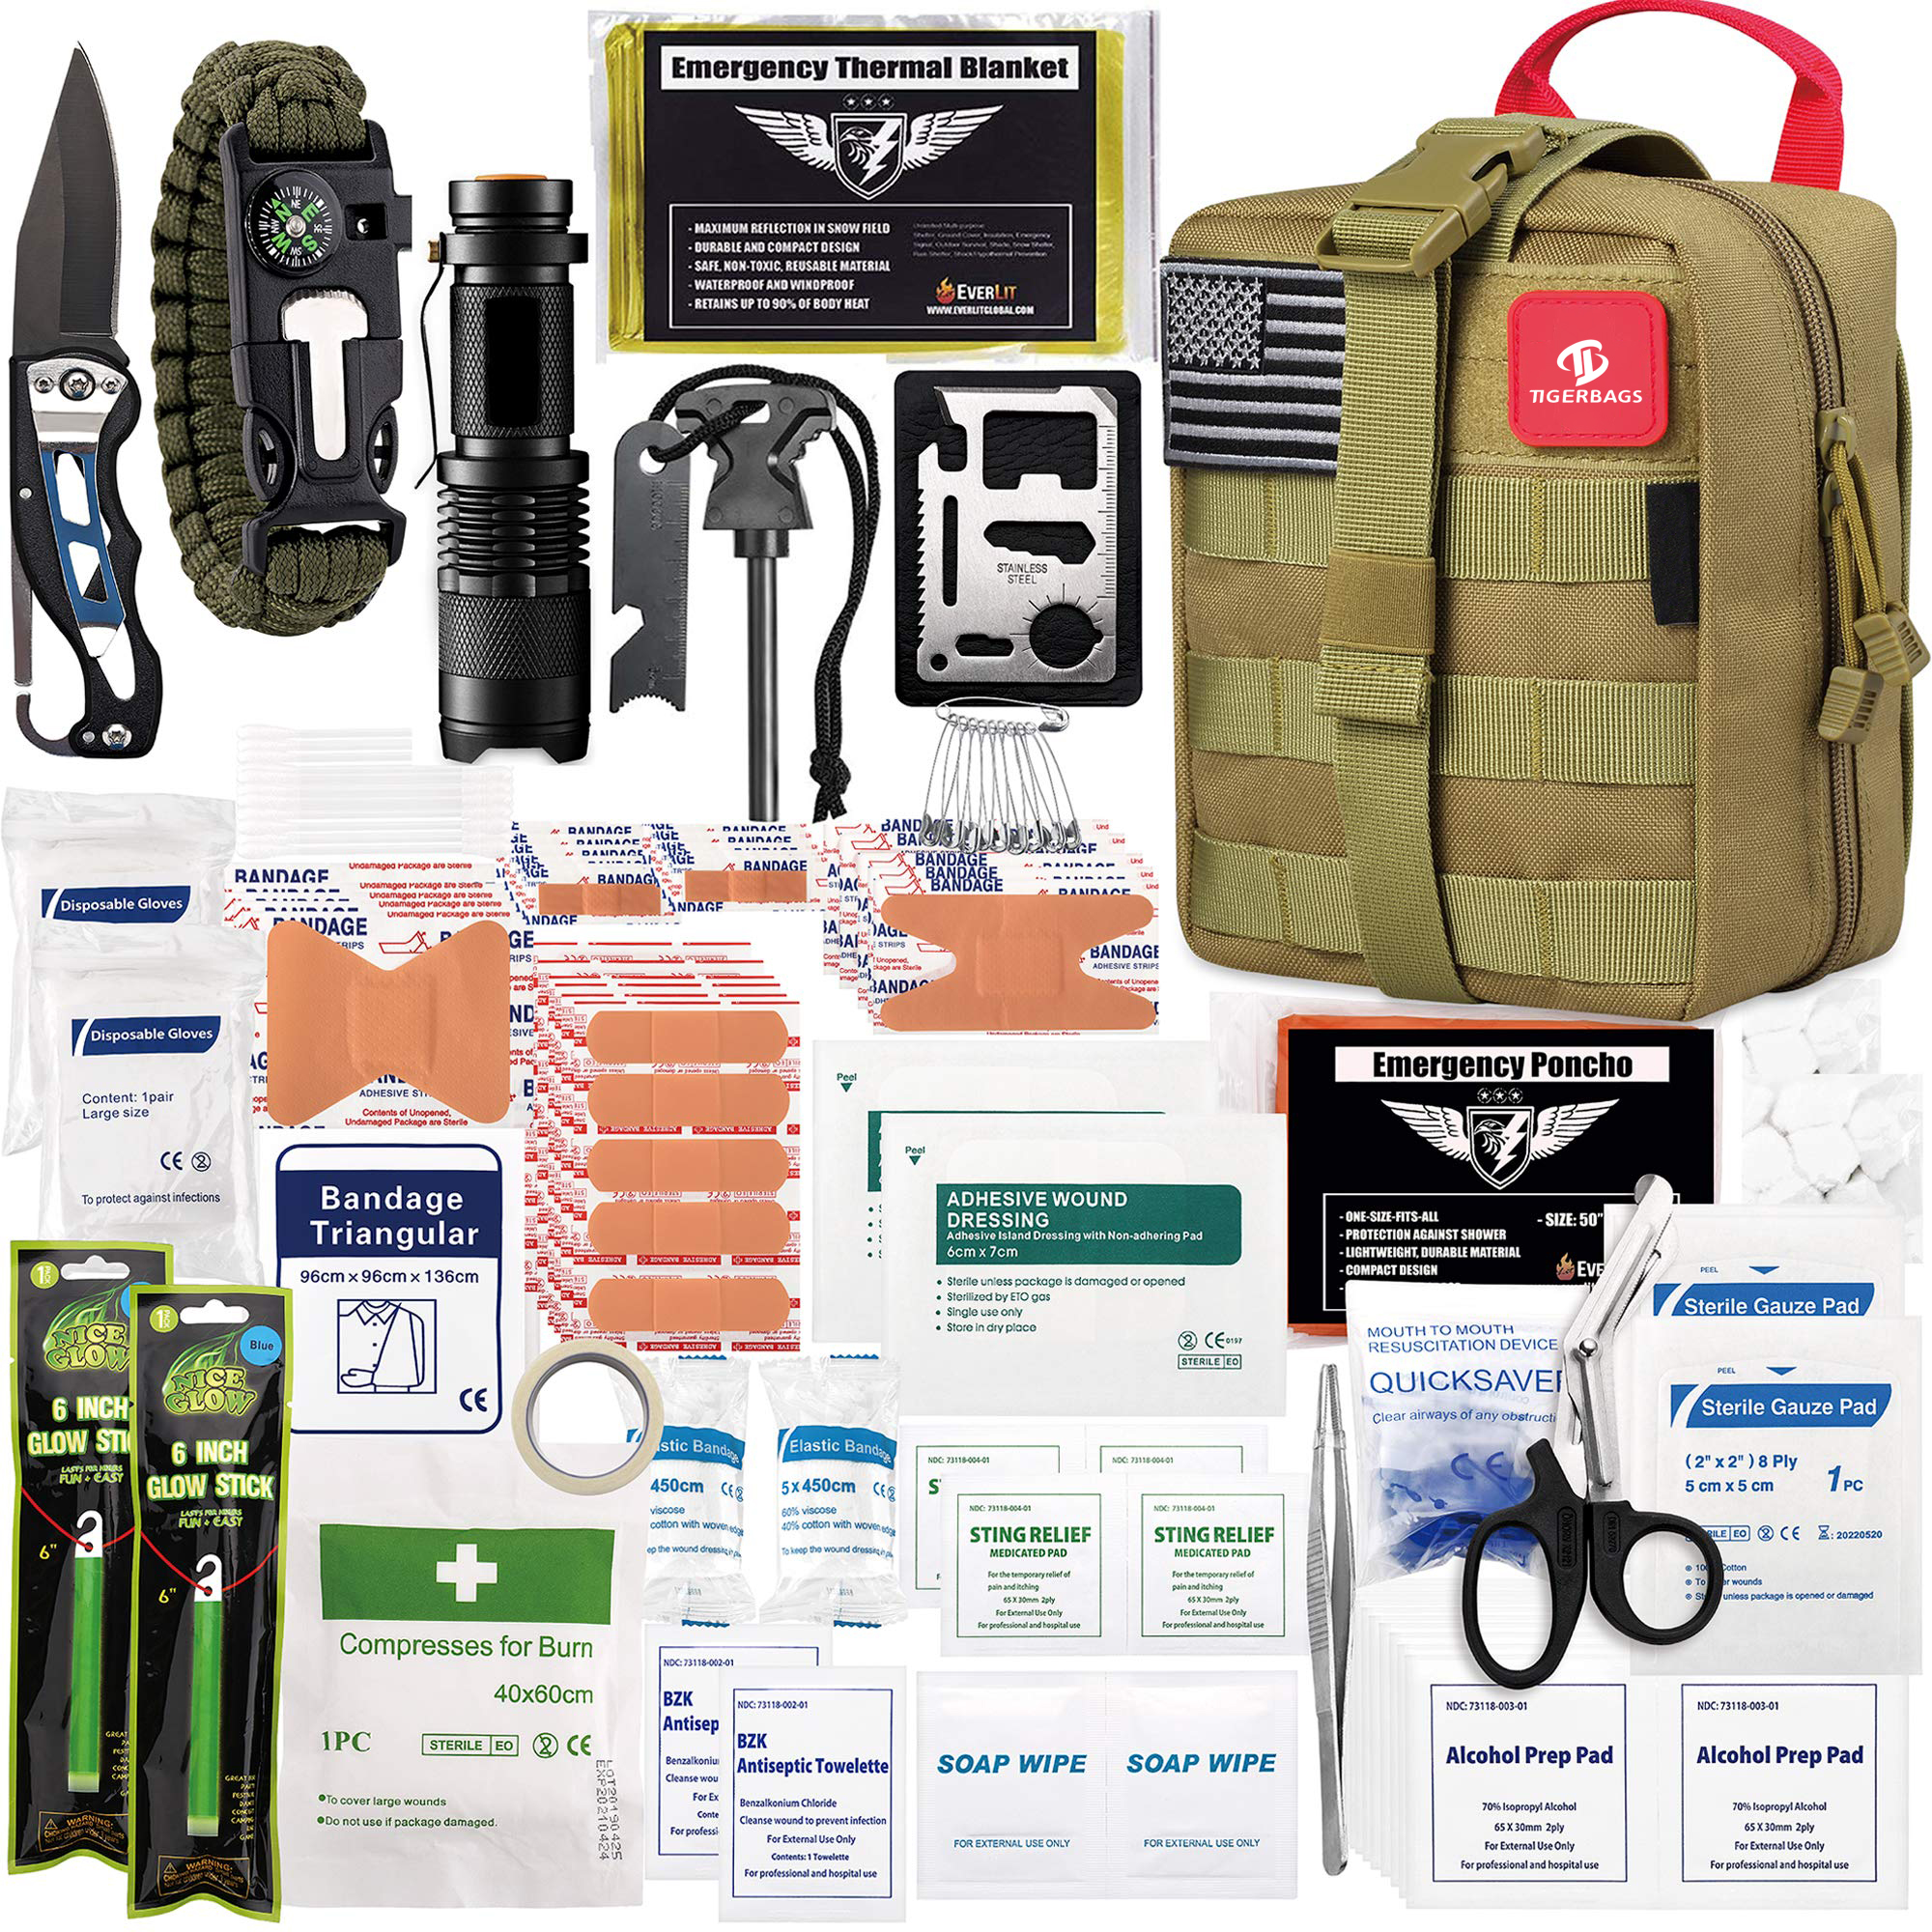 Survival Survival first aid kit Outdoor gear emergency kit Trauma bag  CareFlight and Survival